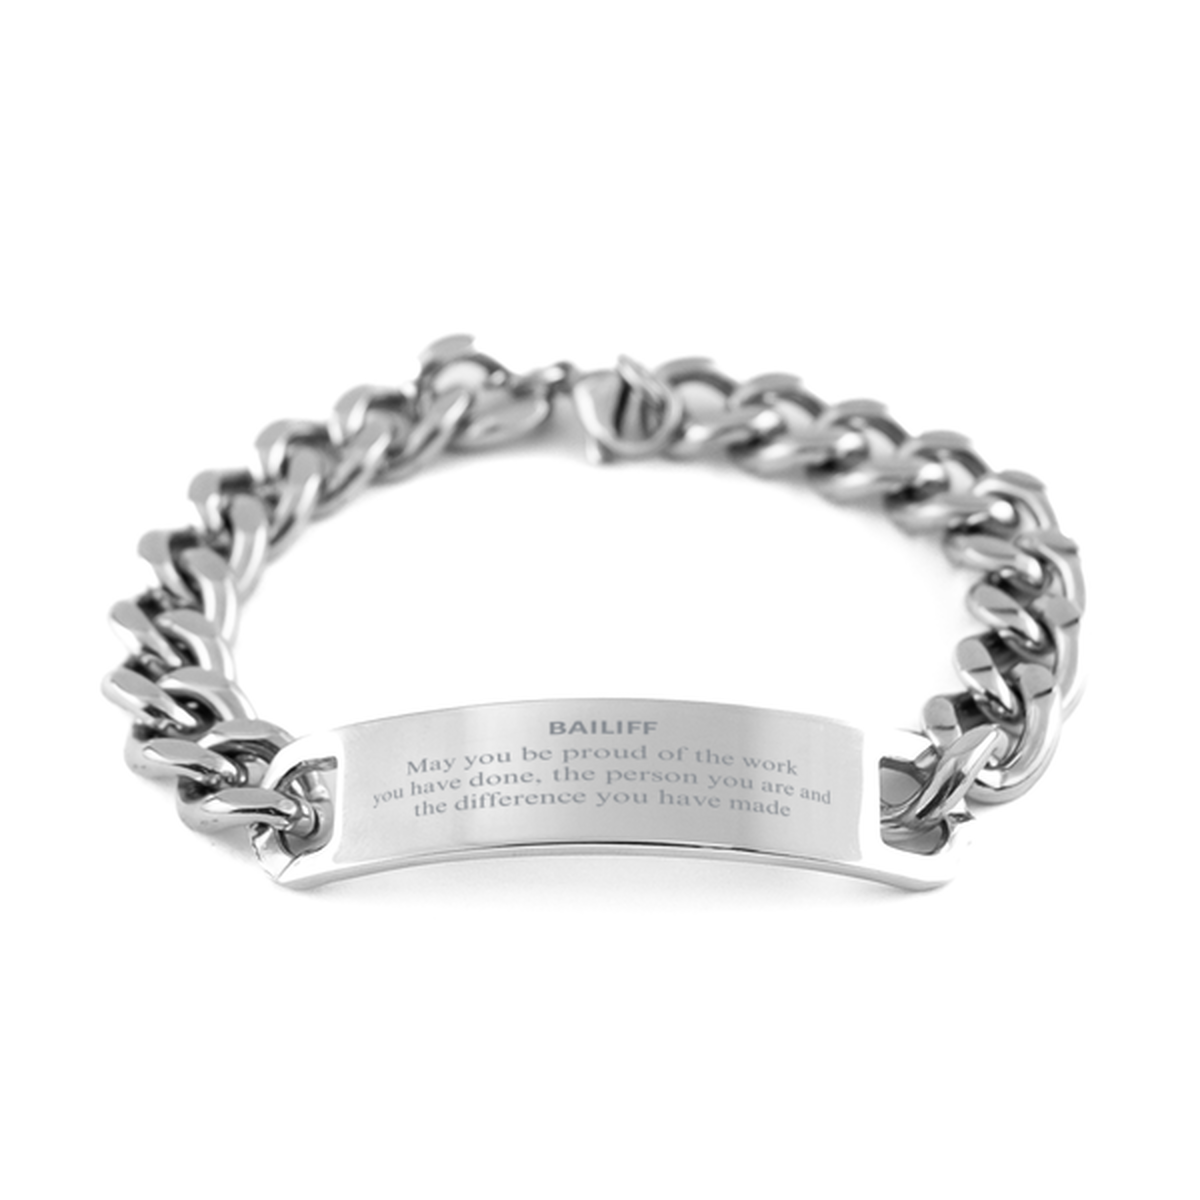 Bailiff May you be proud of the work you have done, Retirement Bailiff Cuban Chain Stainless Steel Bracelet for Colleague Appreciation Gifts Amazing for Bailiff